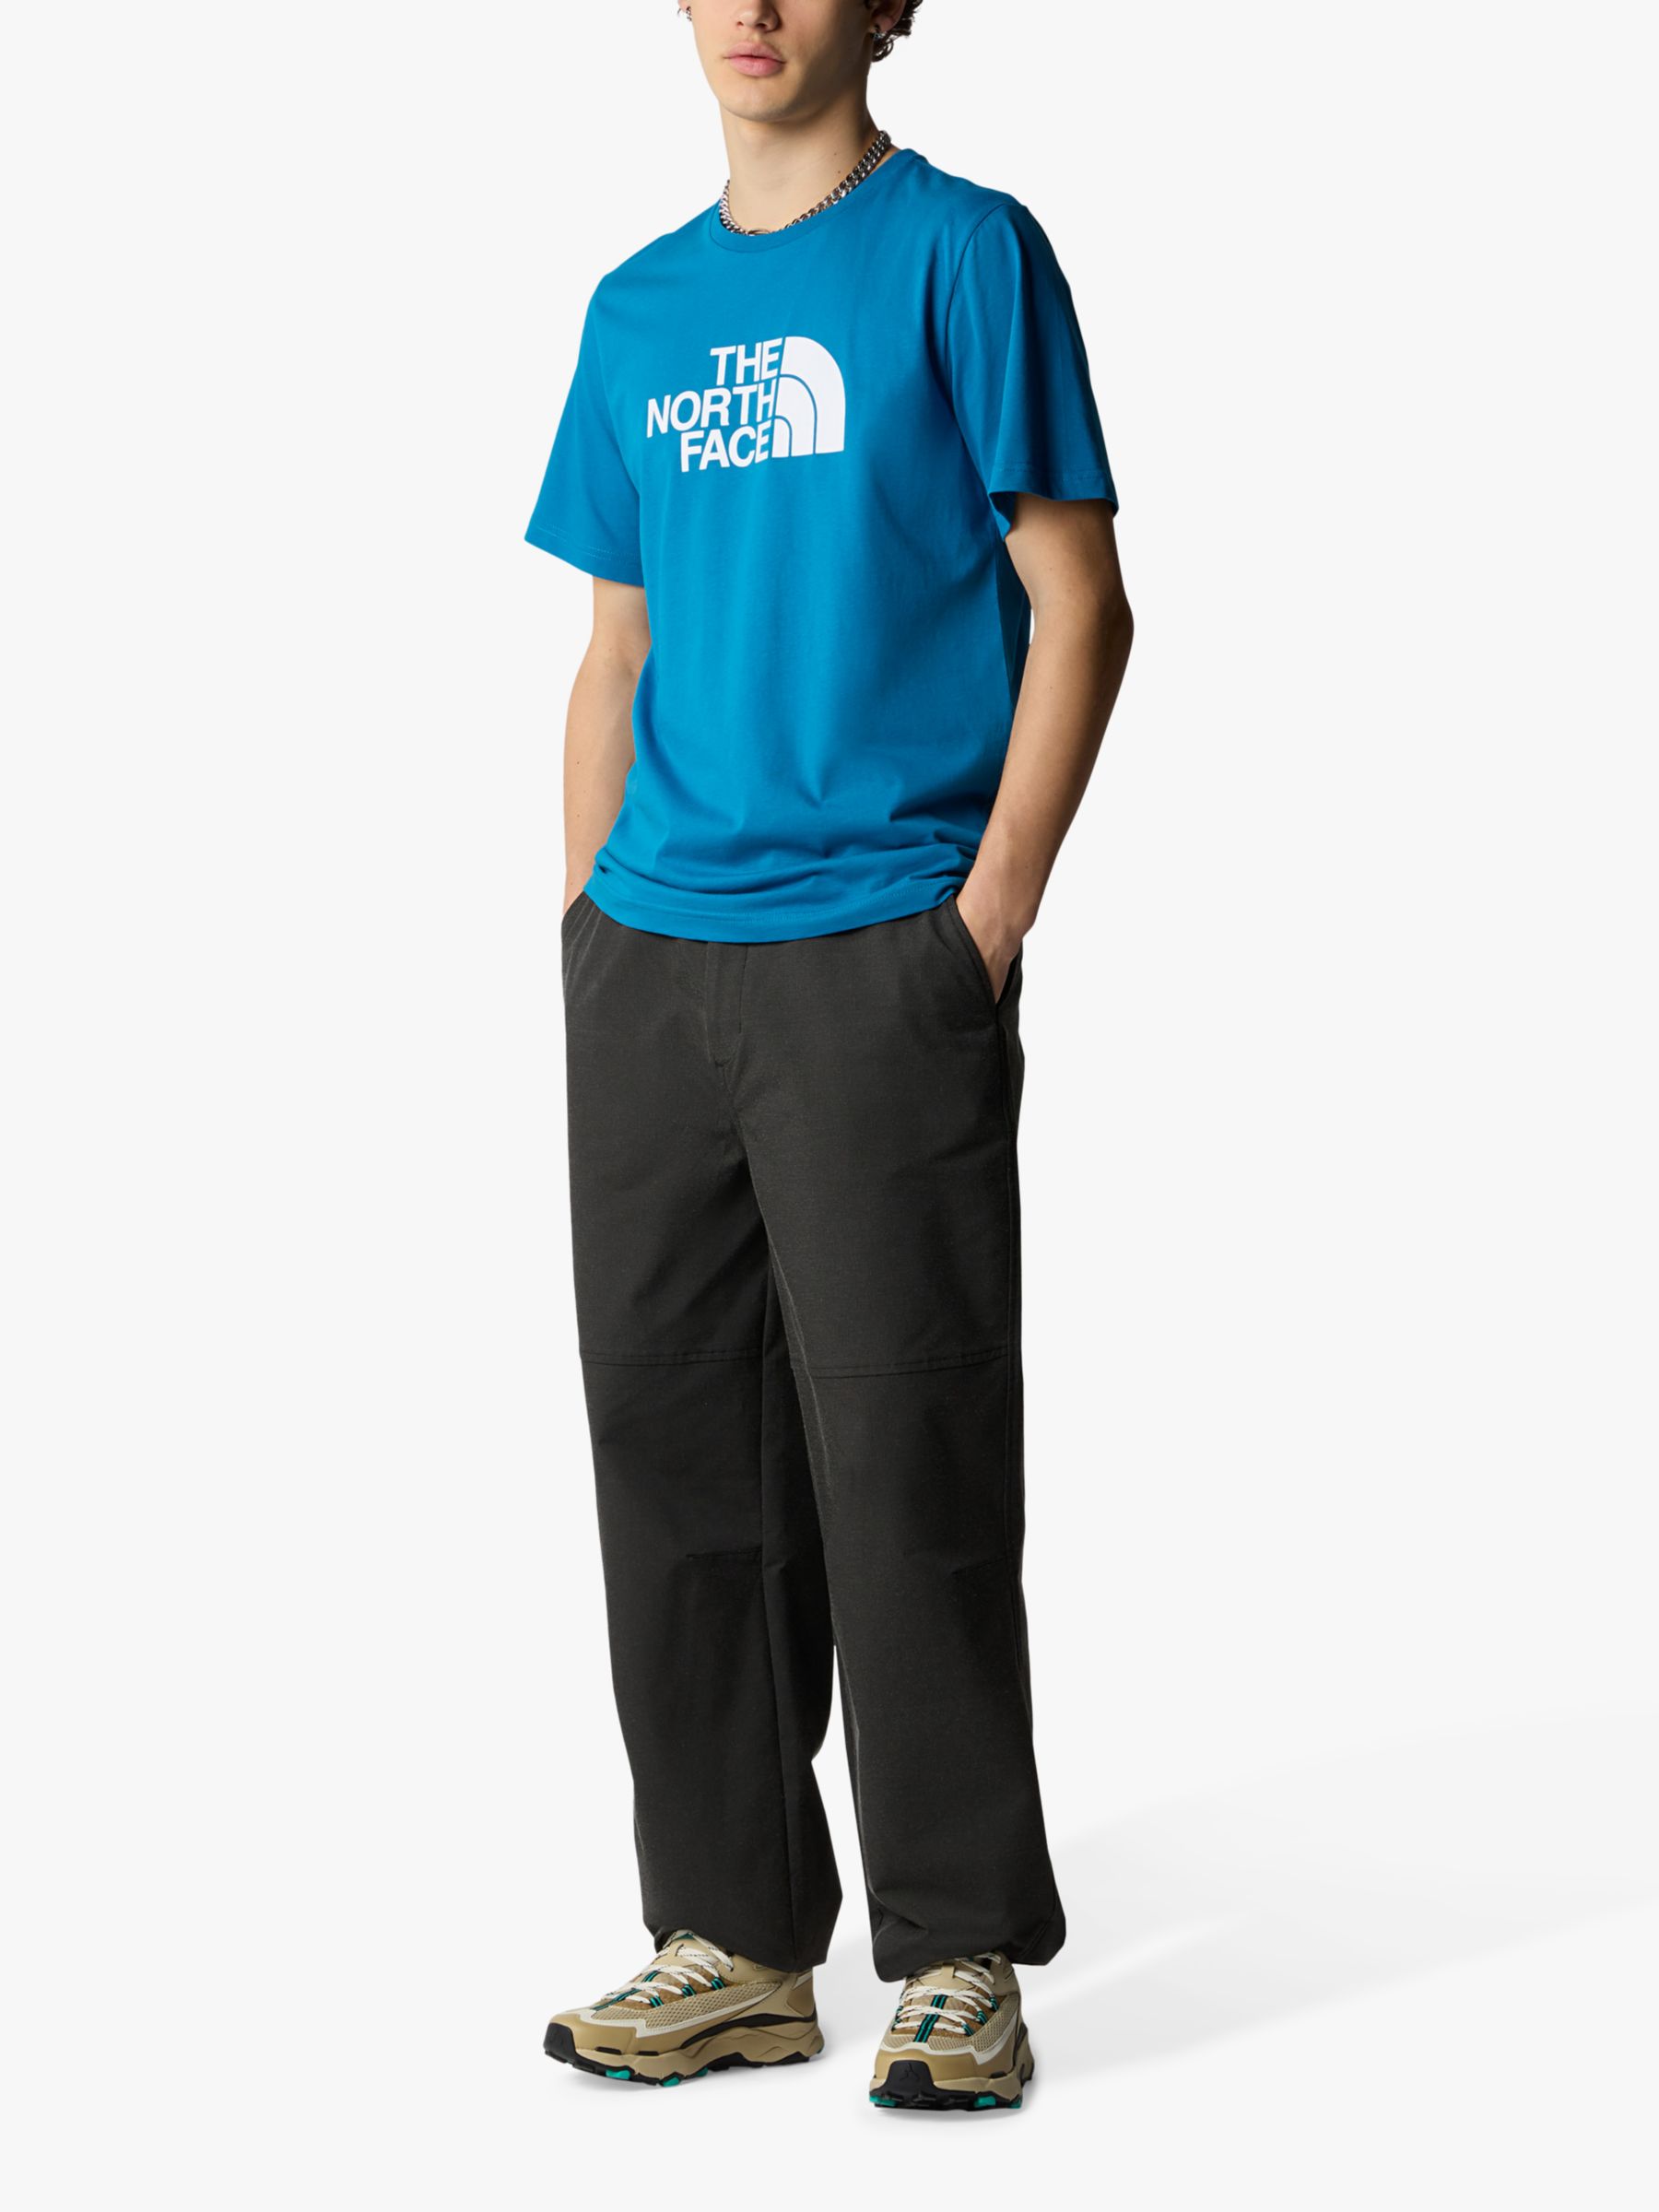 Buy The North Face Easy Short Sleeve T-Shirt, Adriatic Blue Online at johnlewis.com